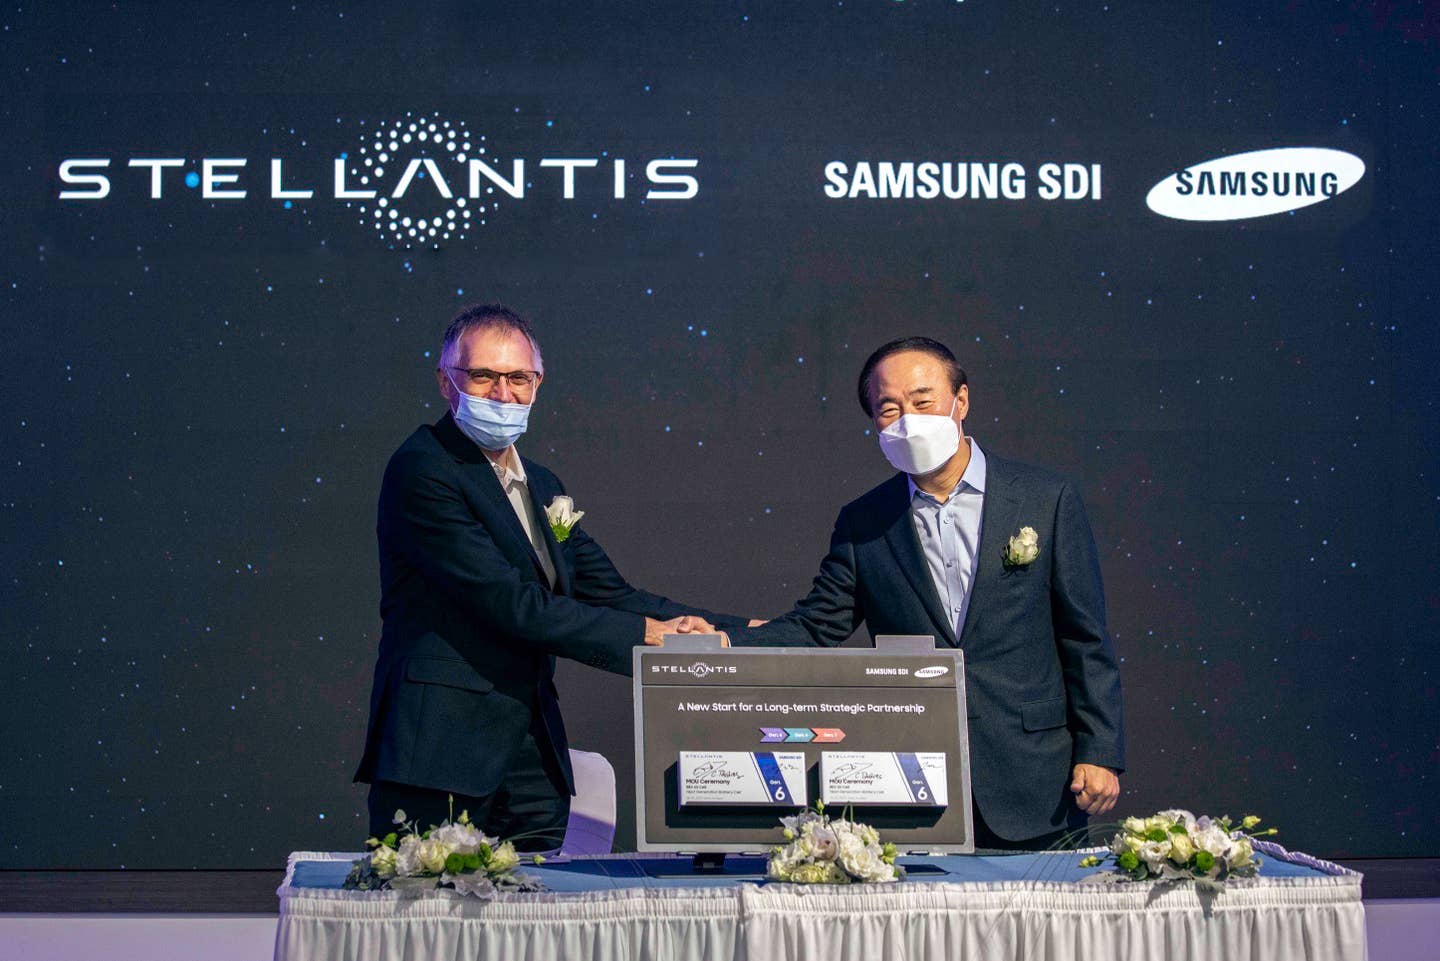 The CEOs of Stellantis and Samsung SDI shake hands to commemorate the new deal.